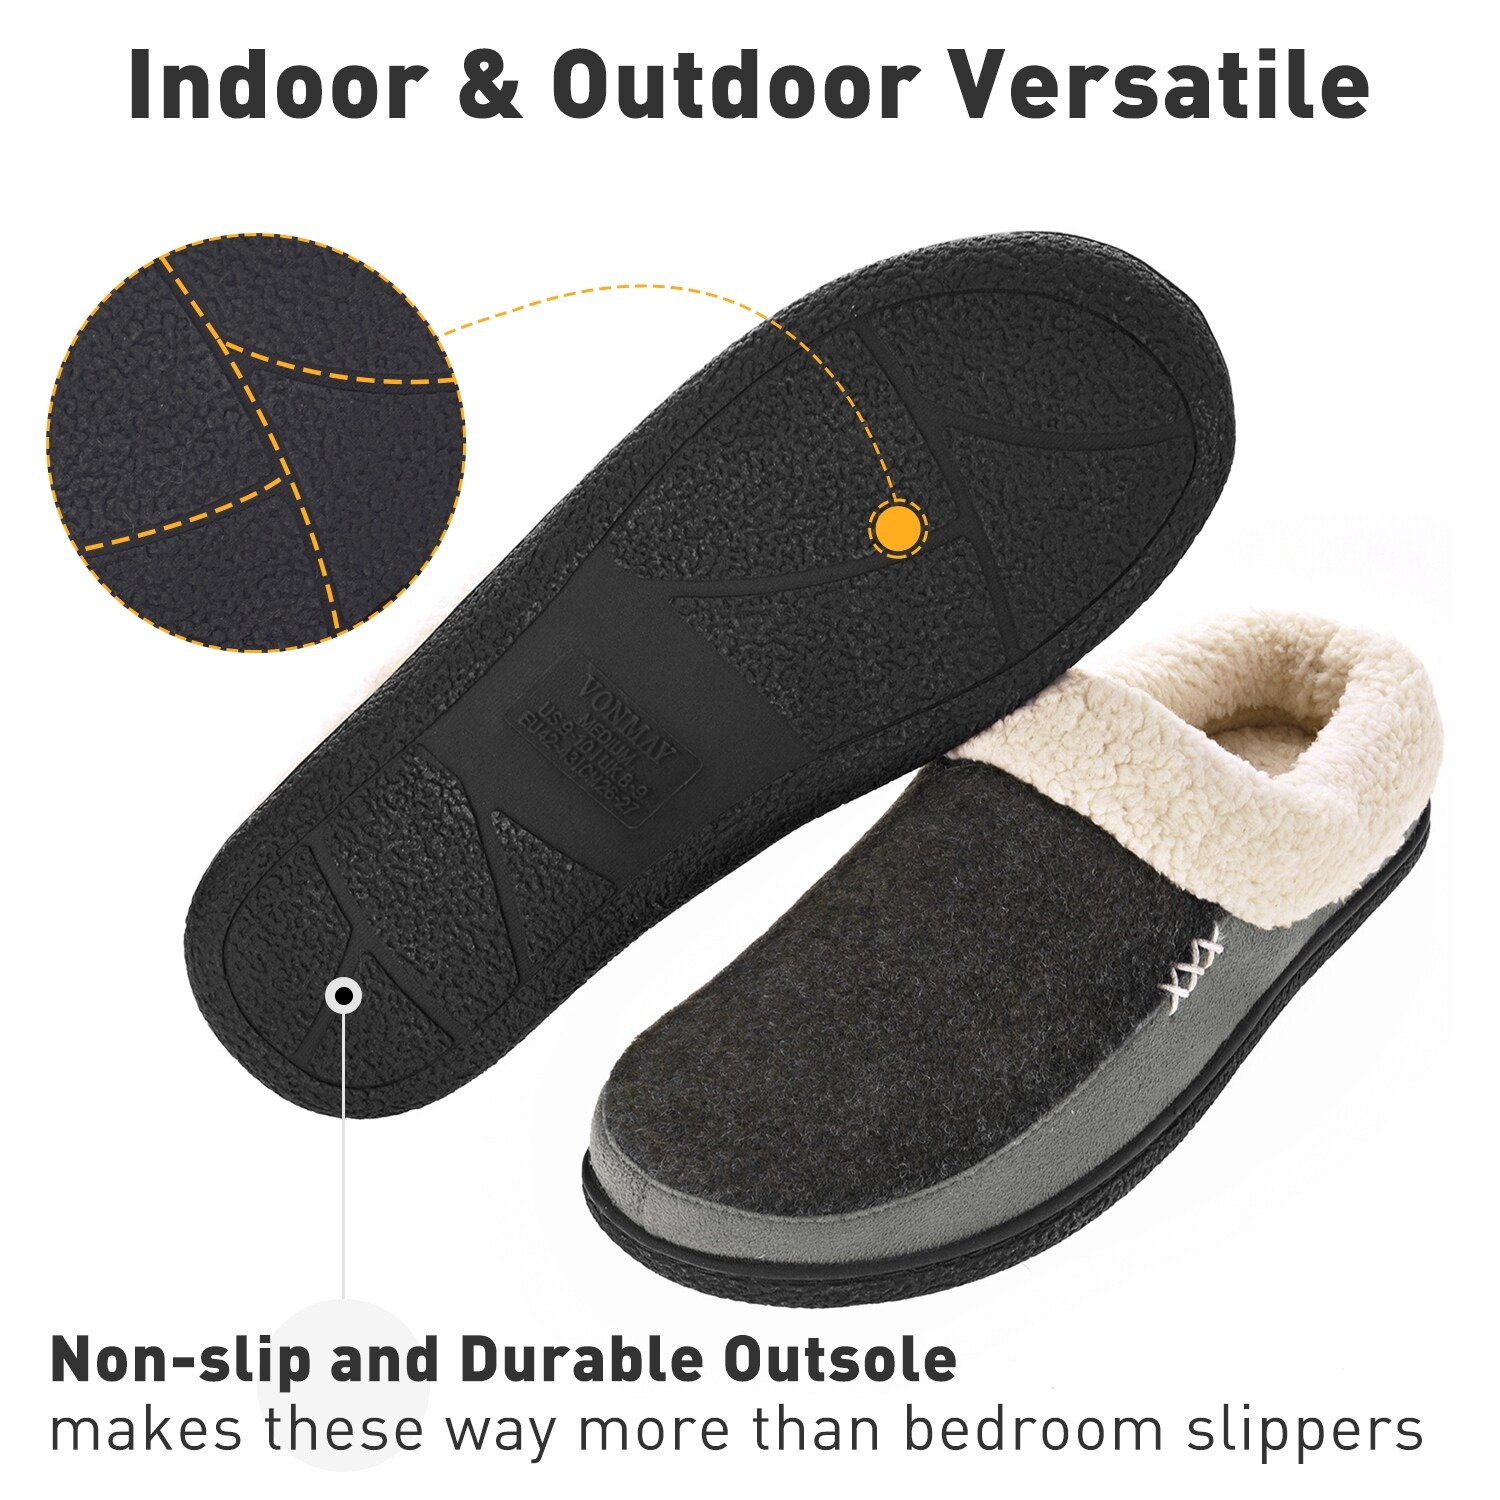 vonmay mens slippers